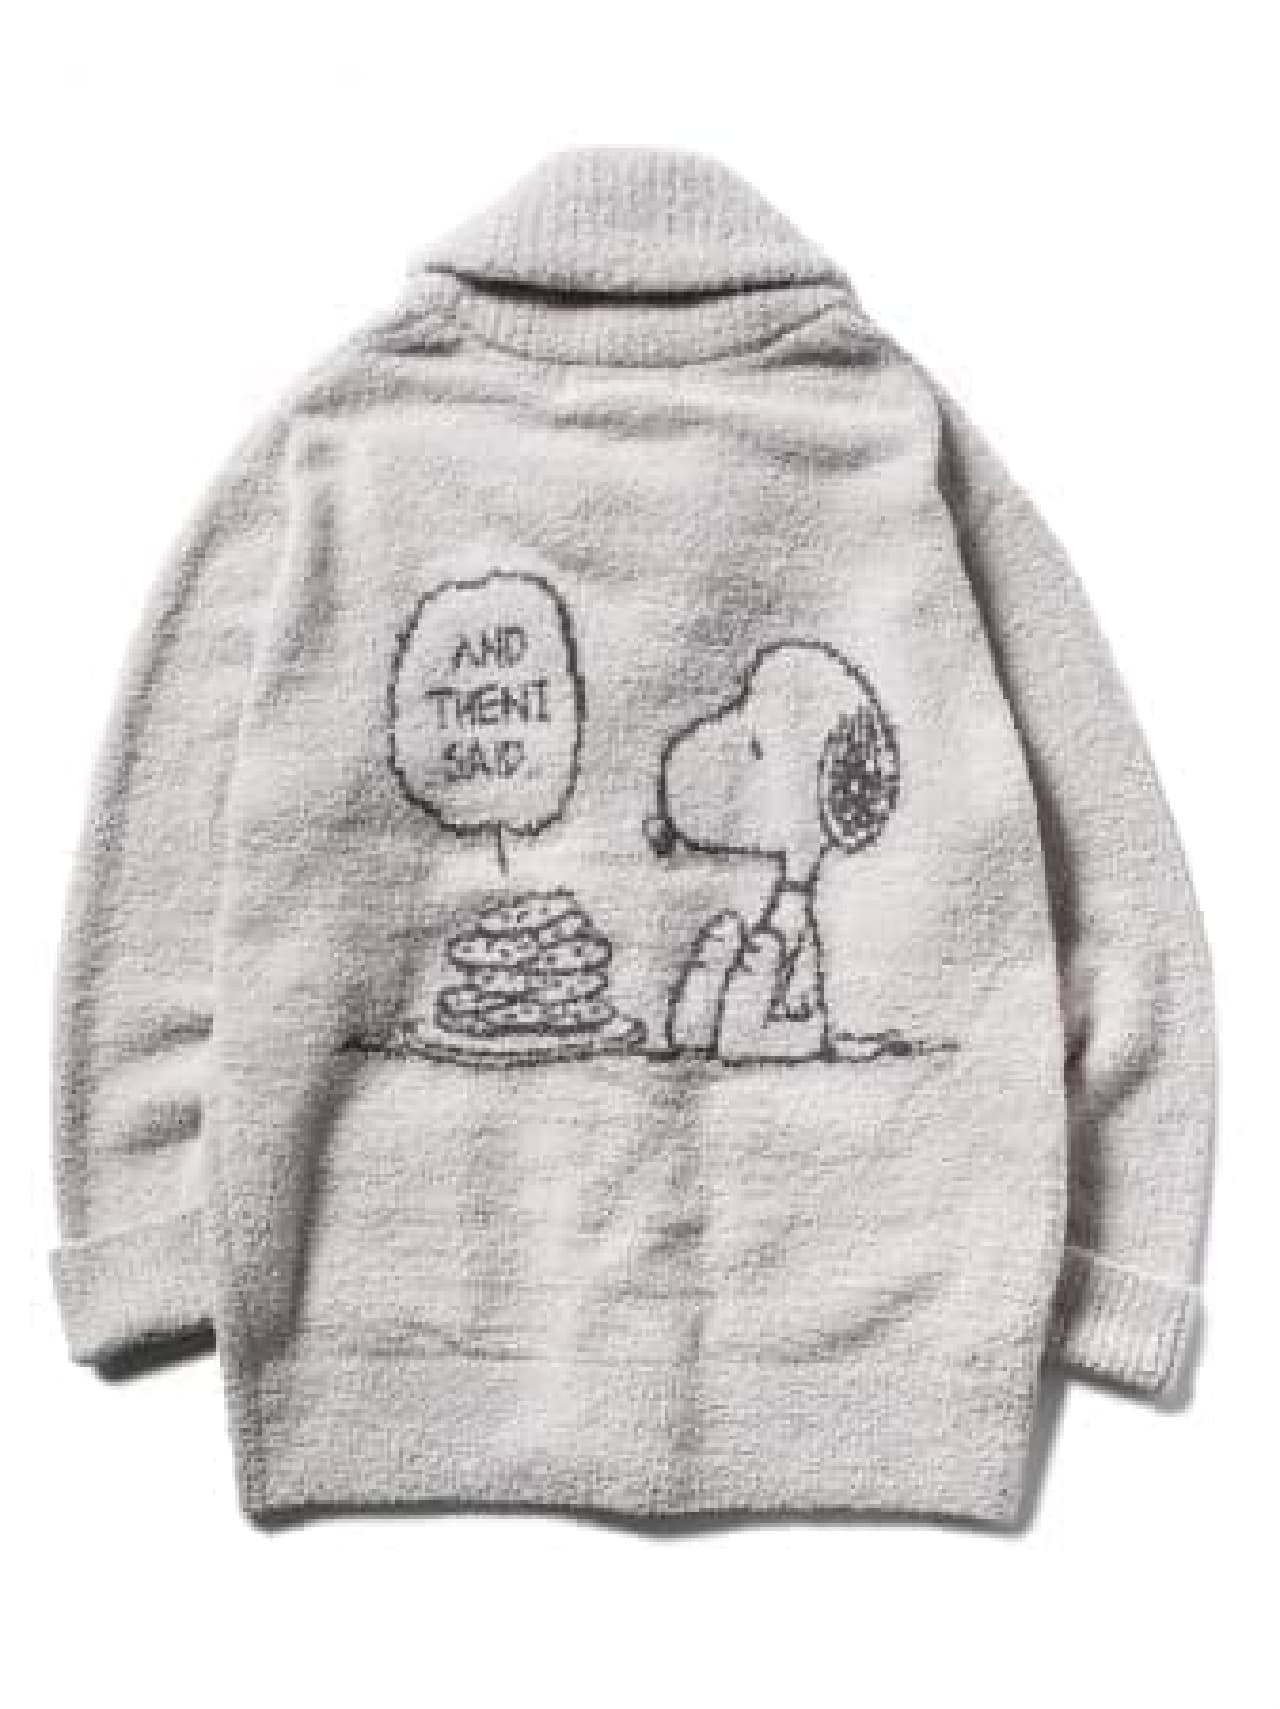 Gelato Pique collaborates with PEANUTS--cute Snoopy roomwear and stuffed animals